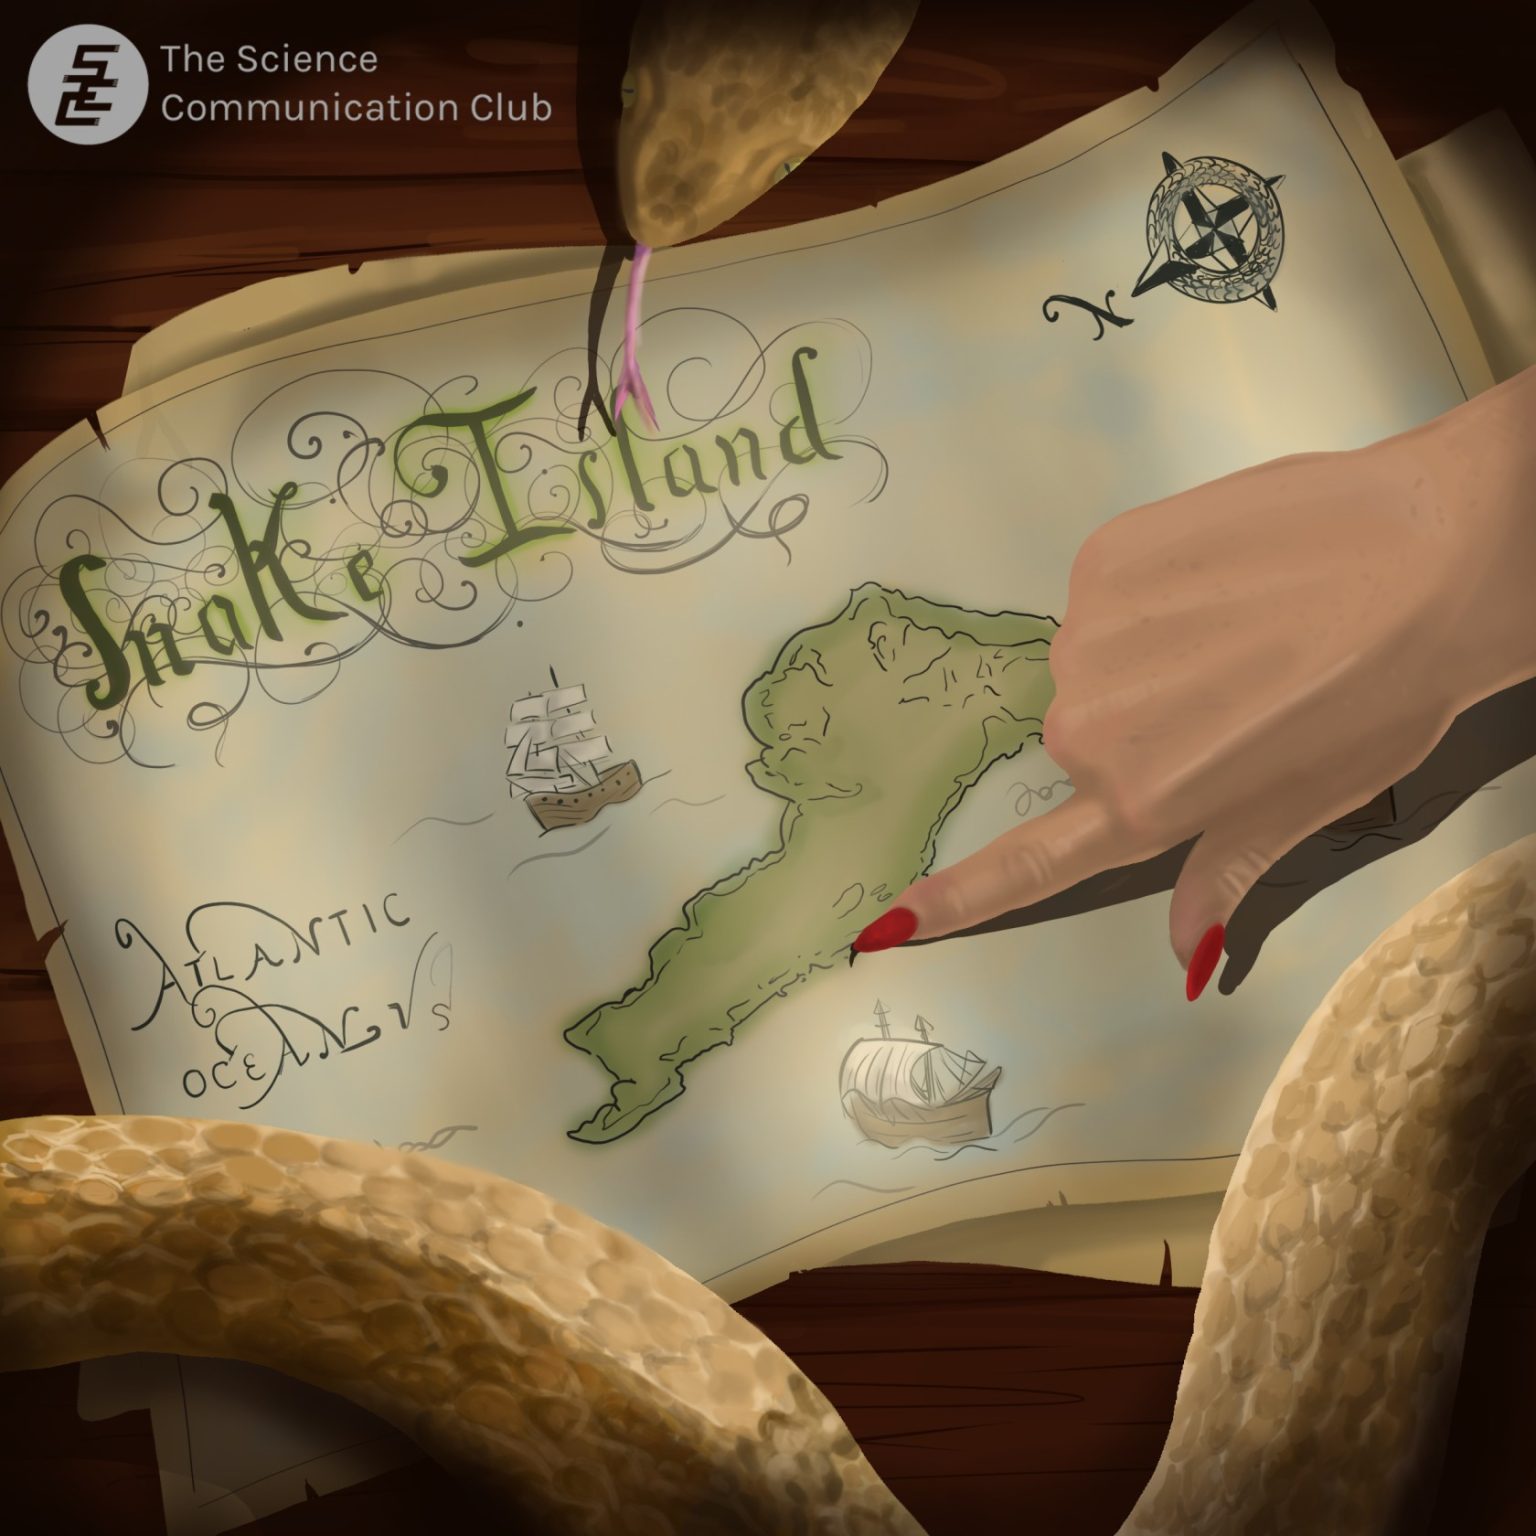 A hand with red nail polish points to the map on the wooden table. The map shows a small island titled "Snake Island" on the top left. Underneath the title "Atlantic Ocean" is written in cursive. Two boats are illustrated around the island and a compass is on the top right of the map. A yellow snake lies around the map.